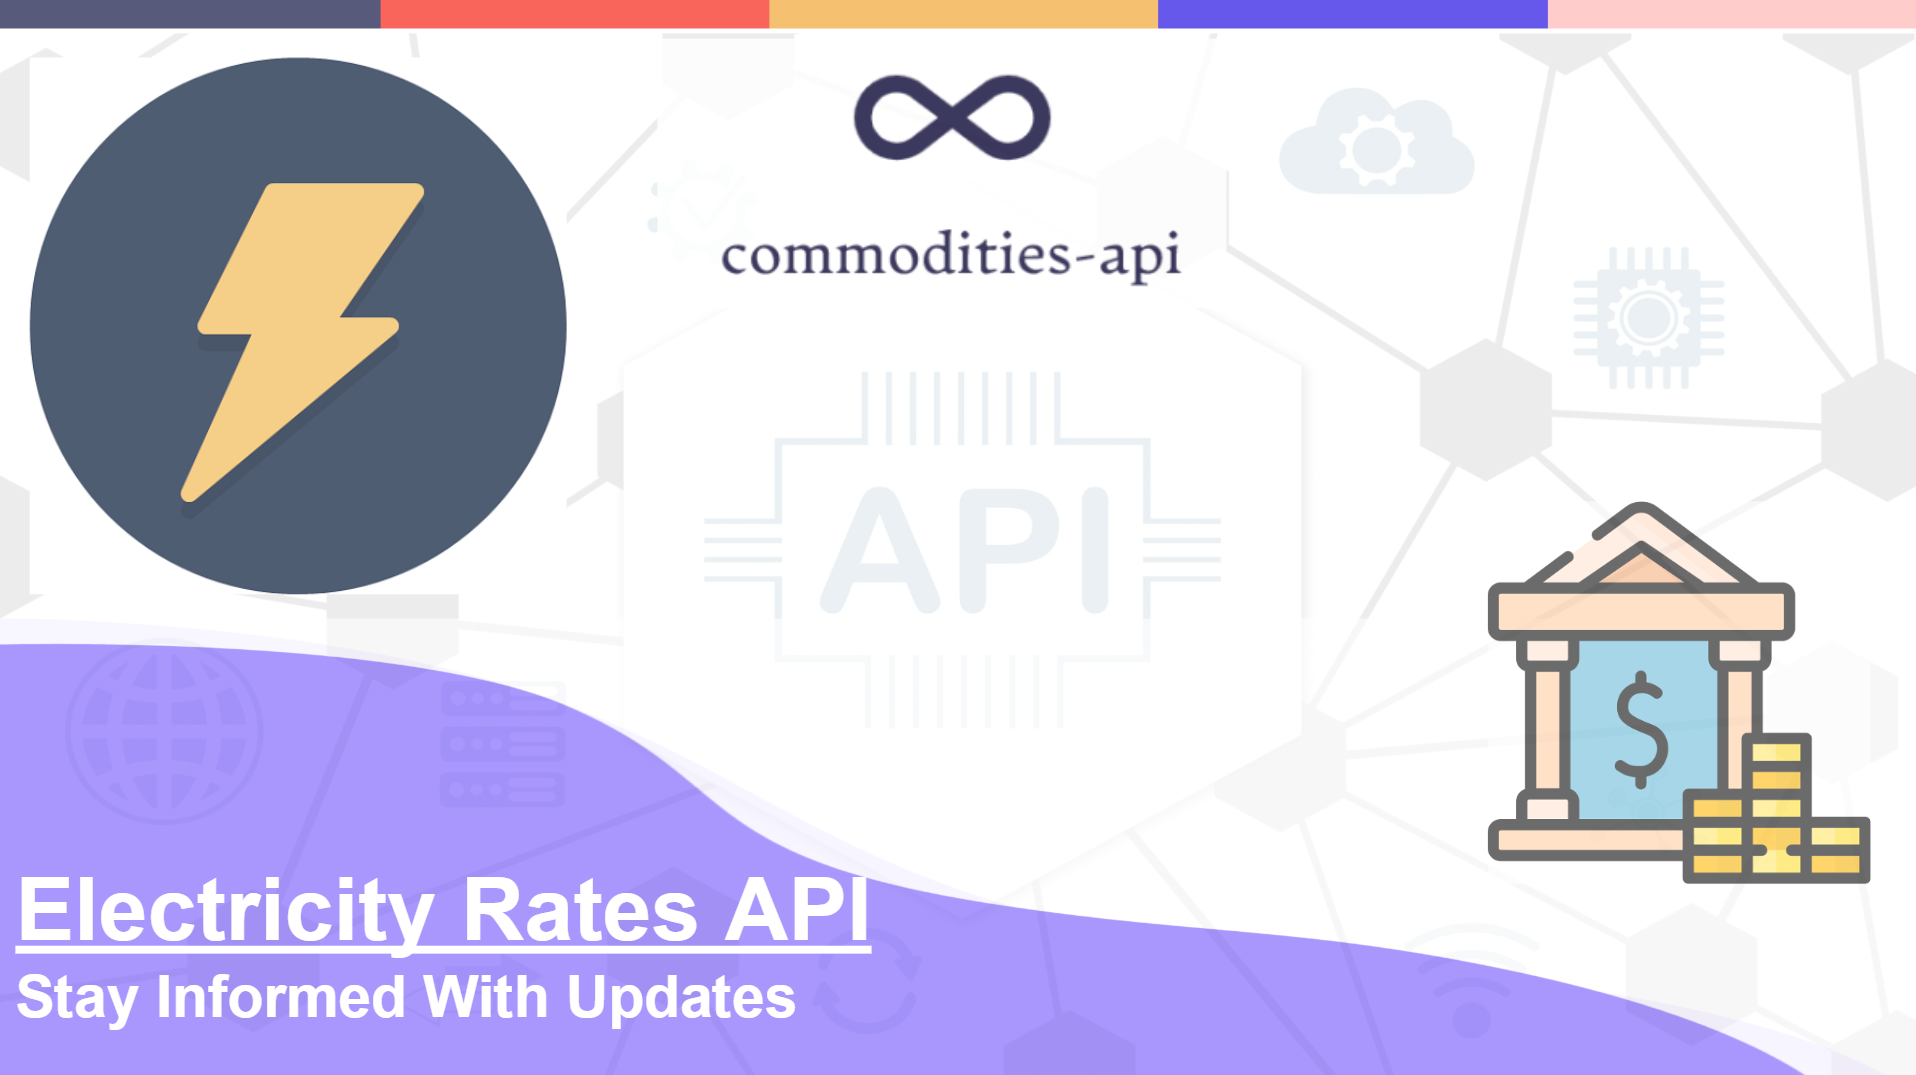 Stay Informed With Electricity Rates API Updates